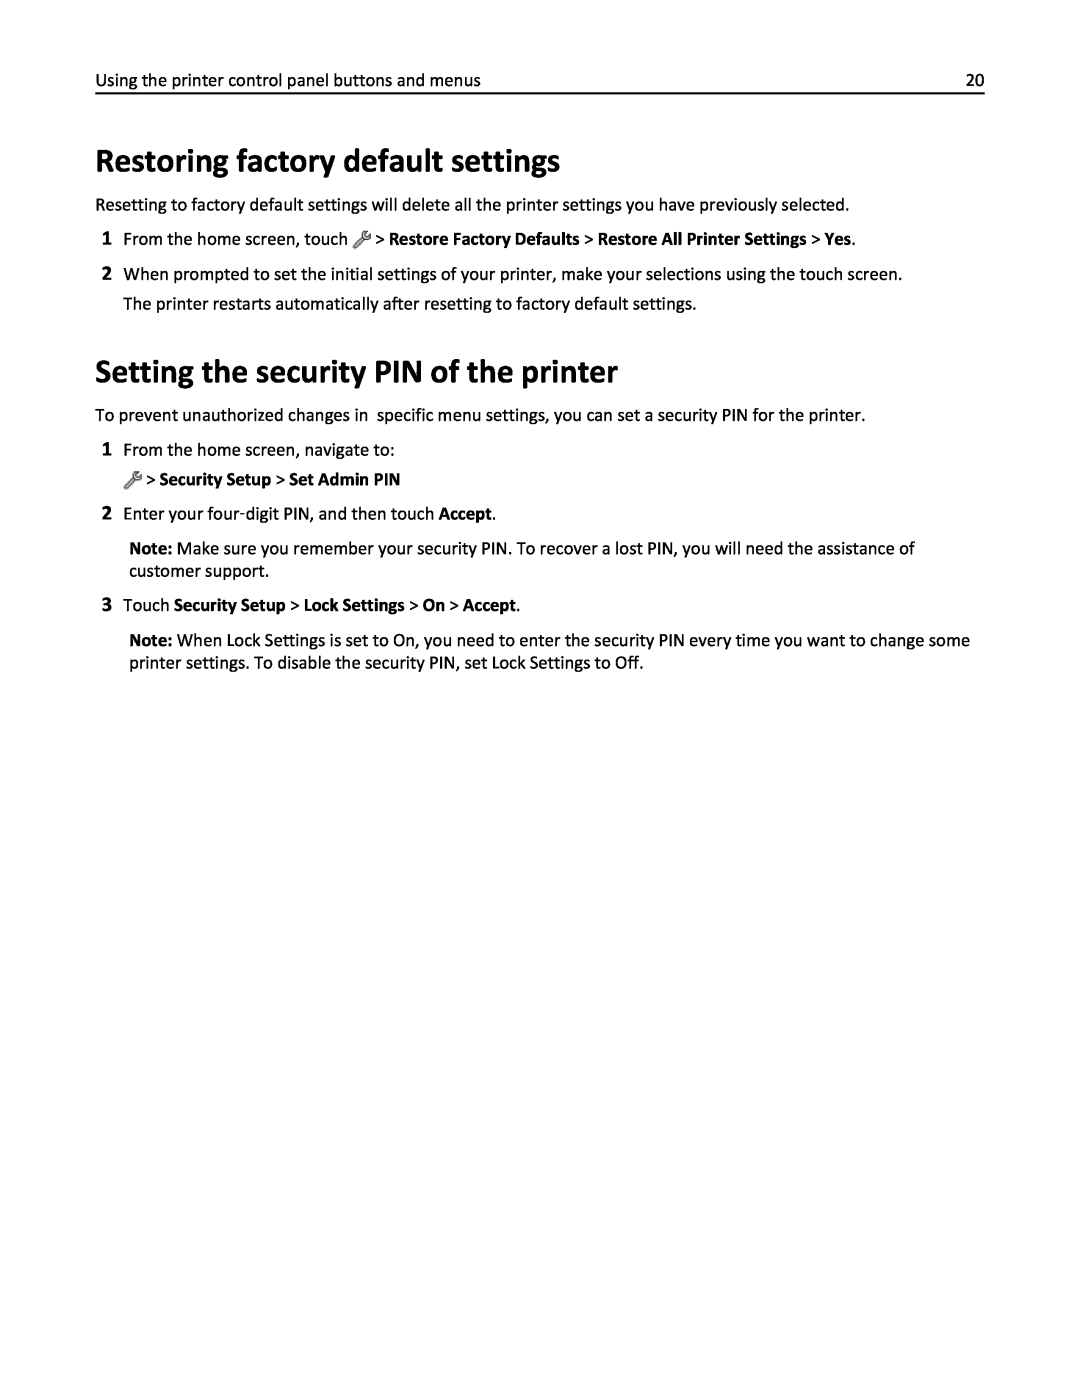 Lexmark 20E, 200 manual Restoring factory default settings, Setting the security PIN of the printer 